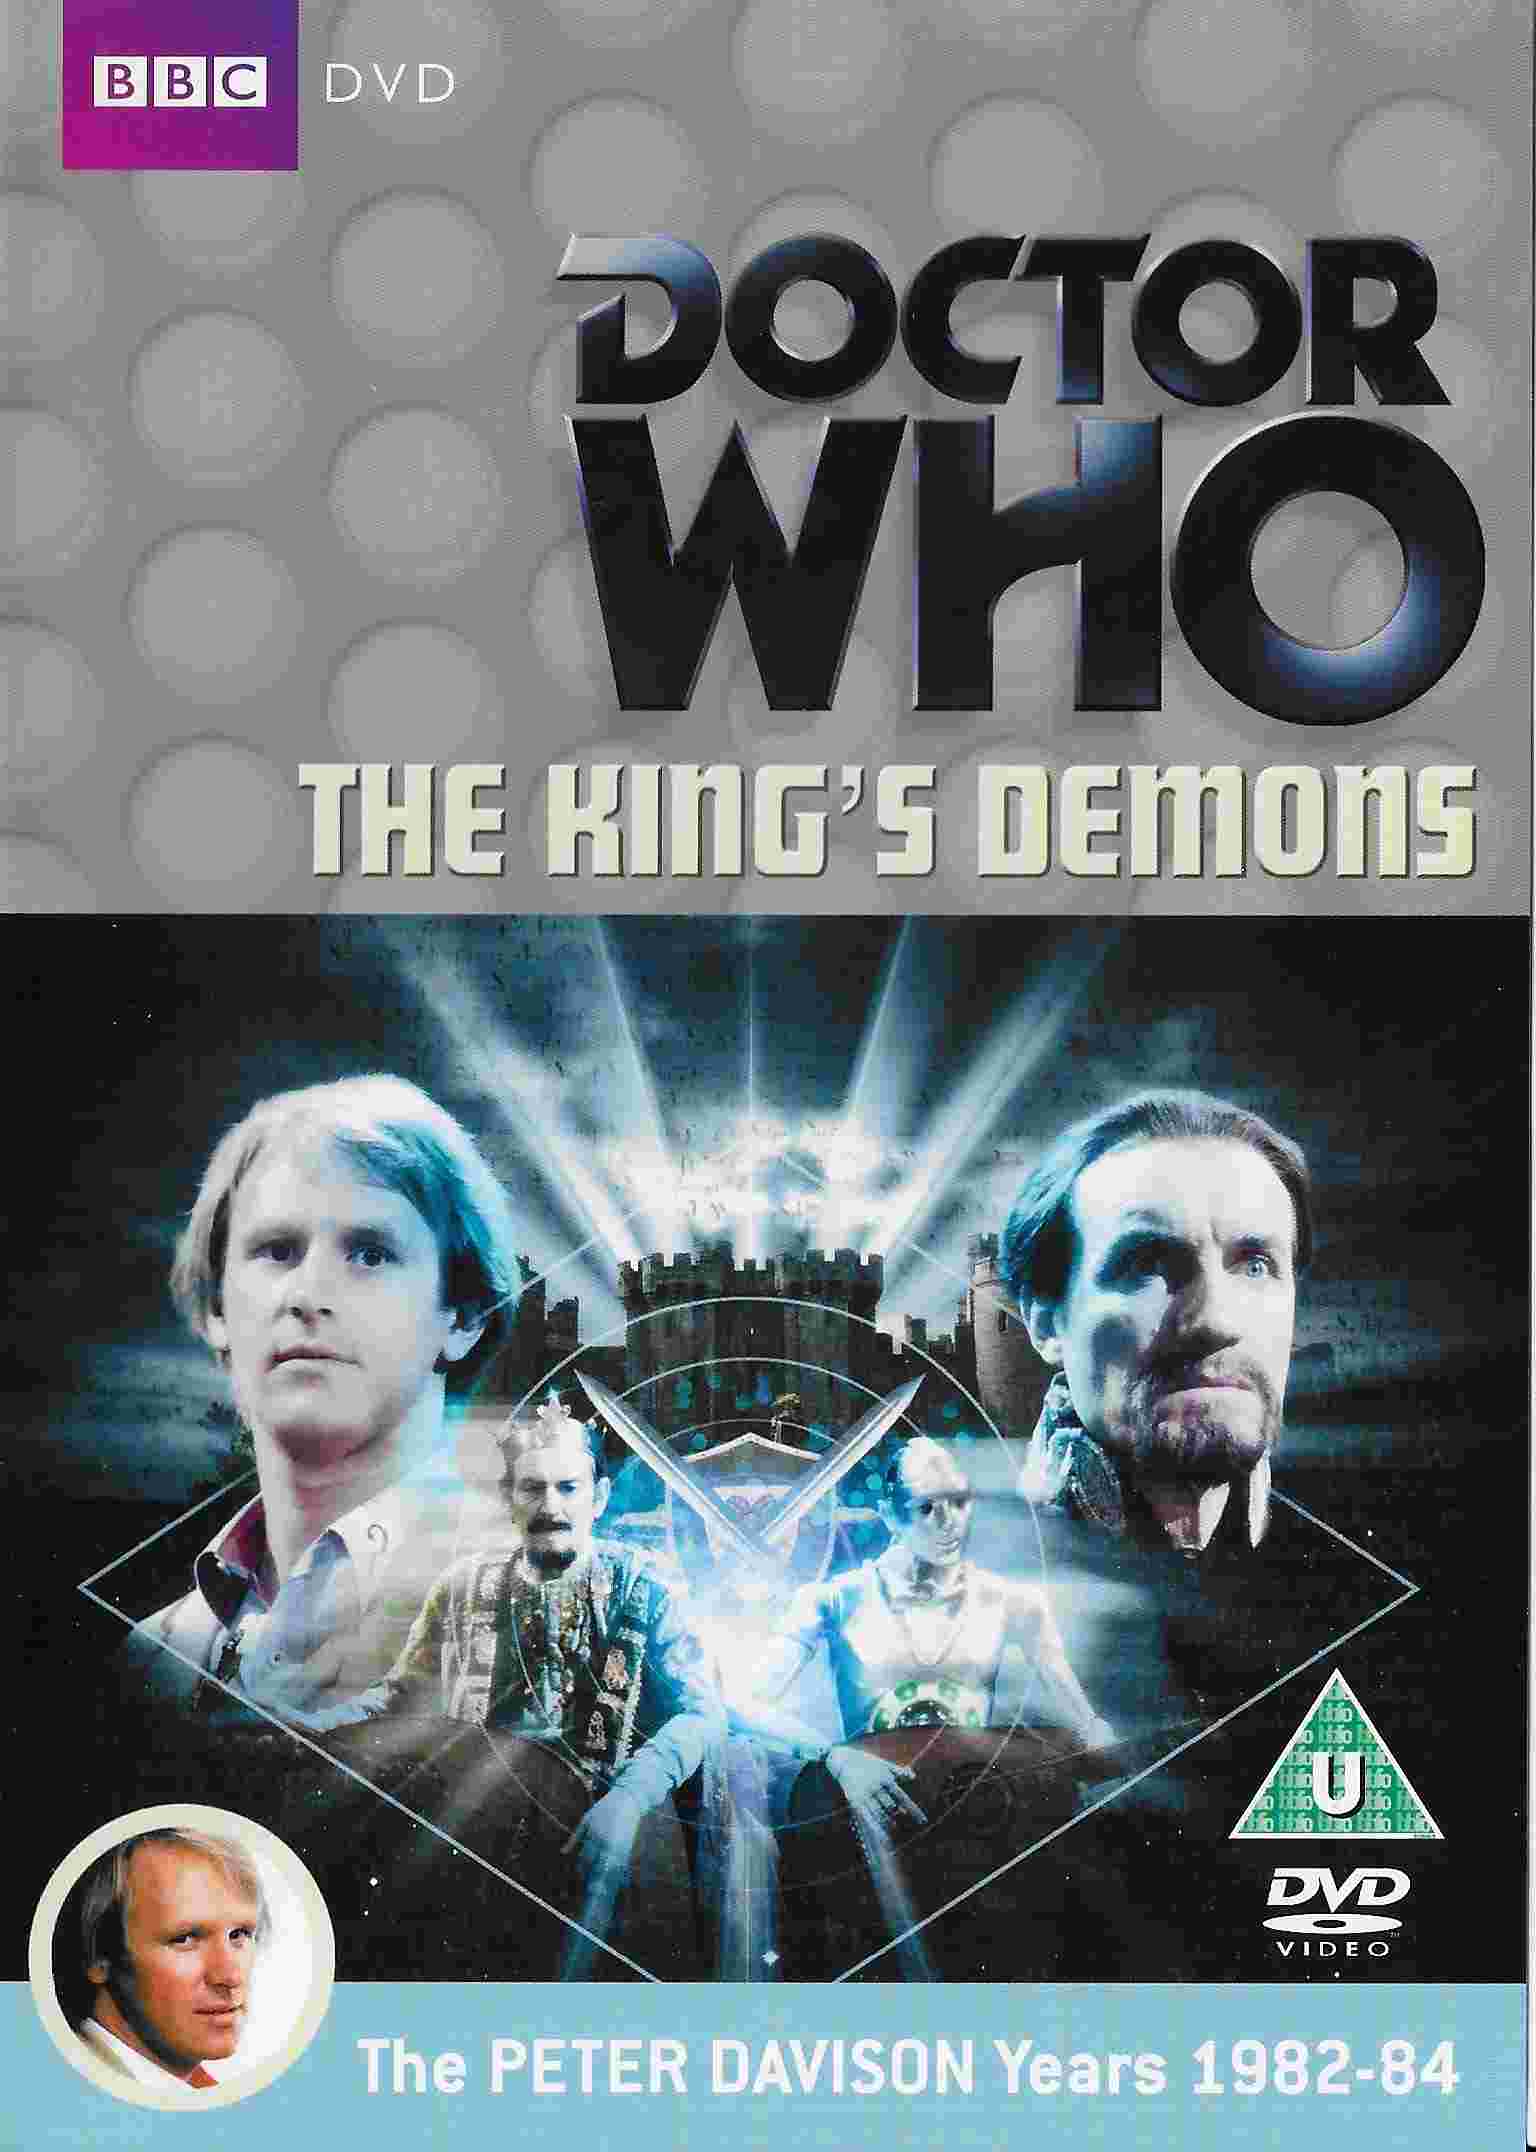 Picture of BBCDVD 2738A Doctor Who - The King\'s demons by artist Terence Dudley from the BBC records and Tapes library